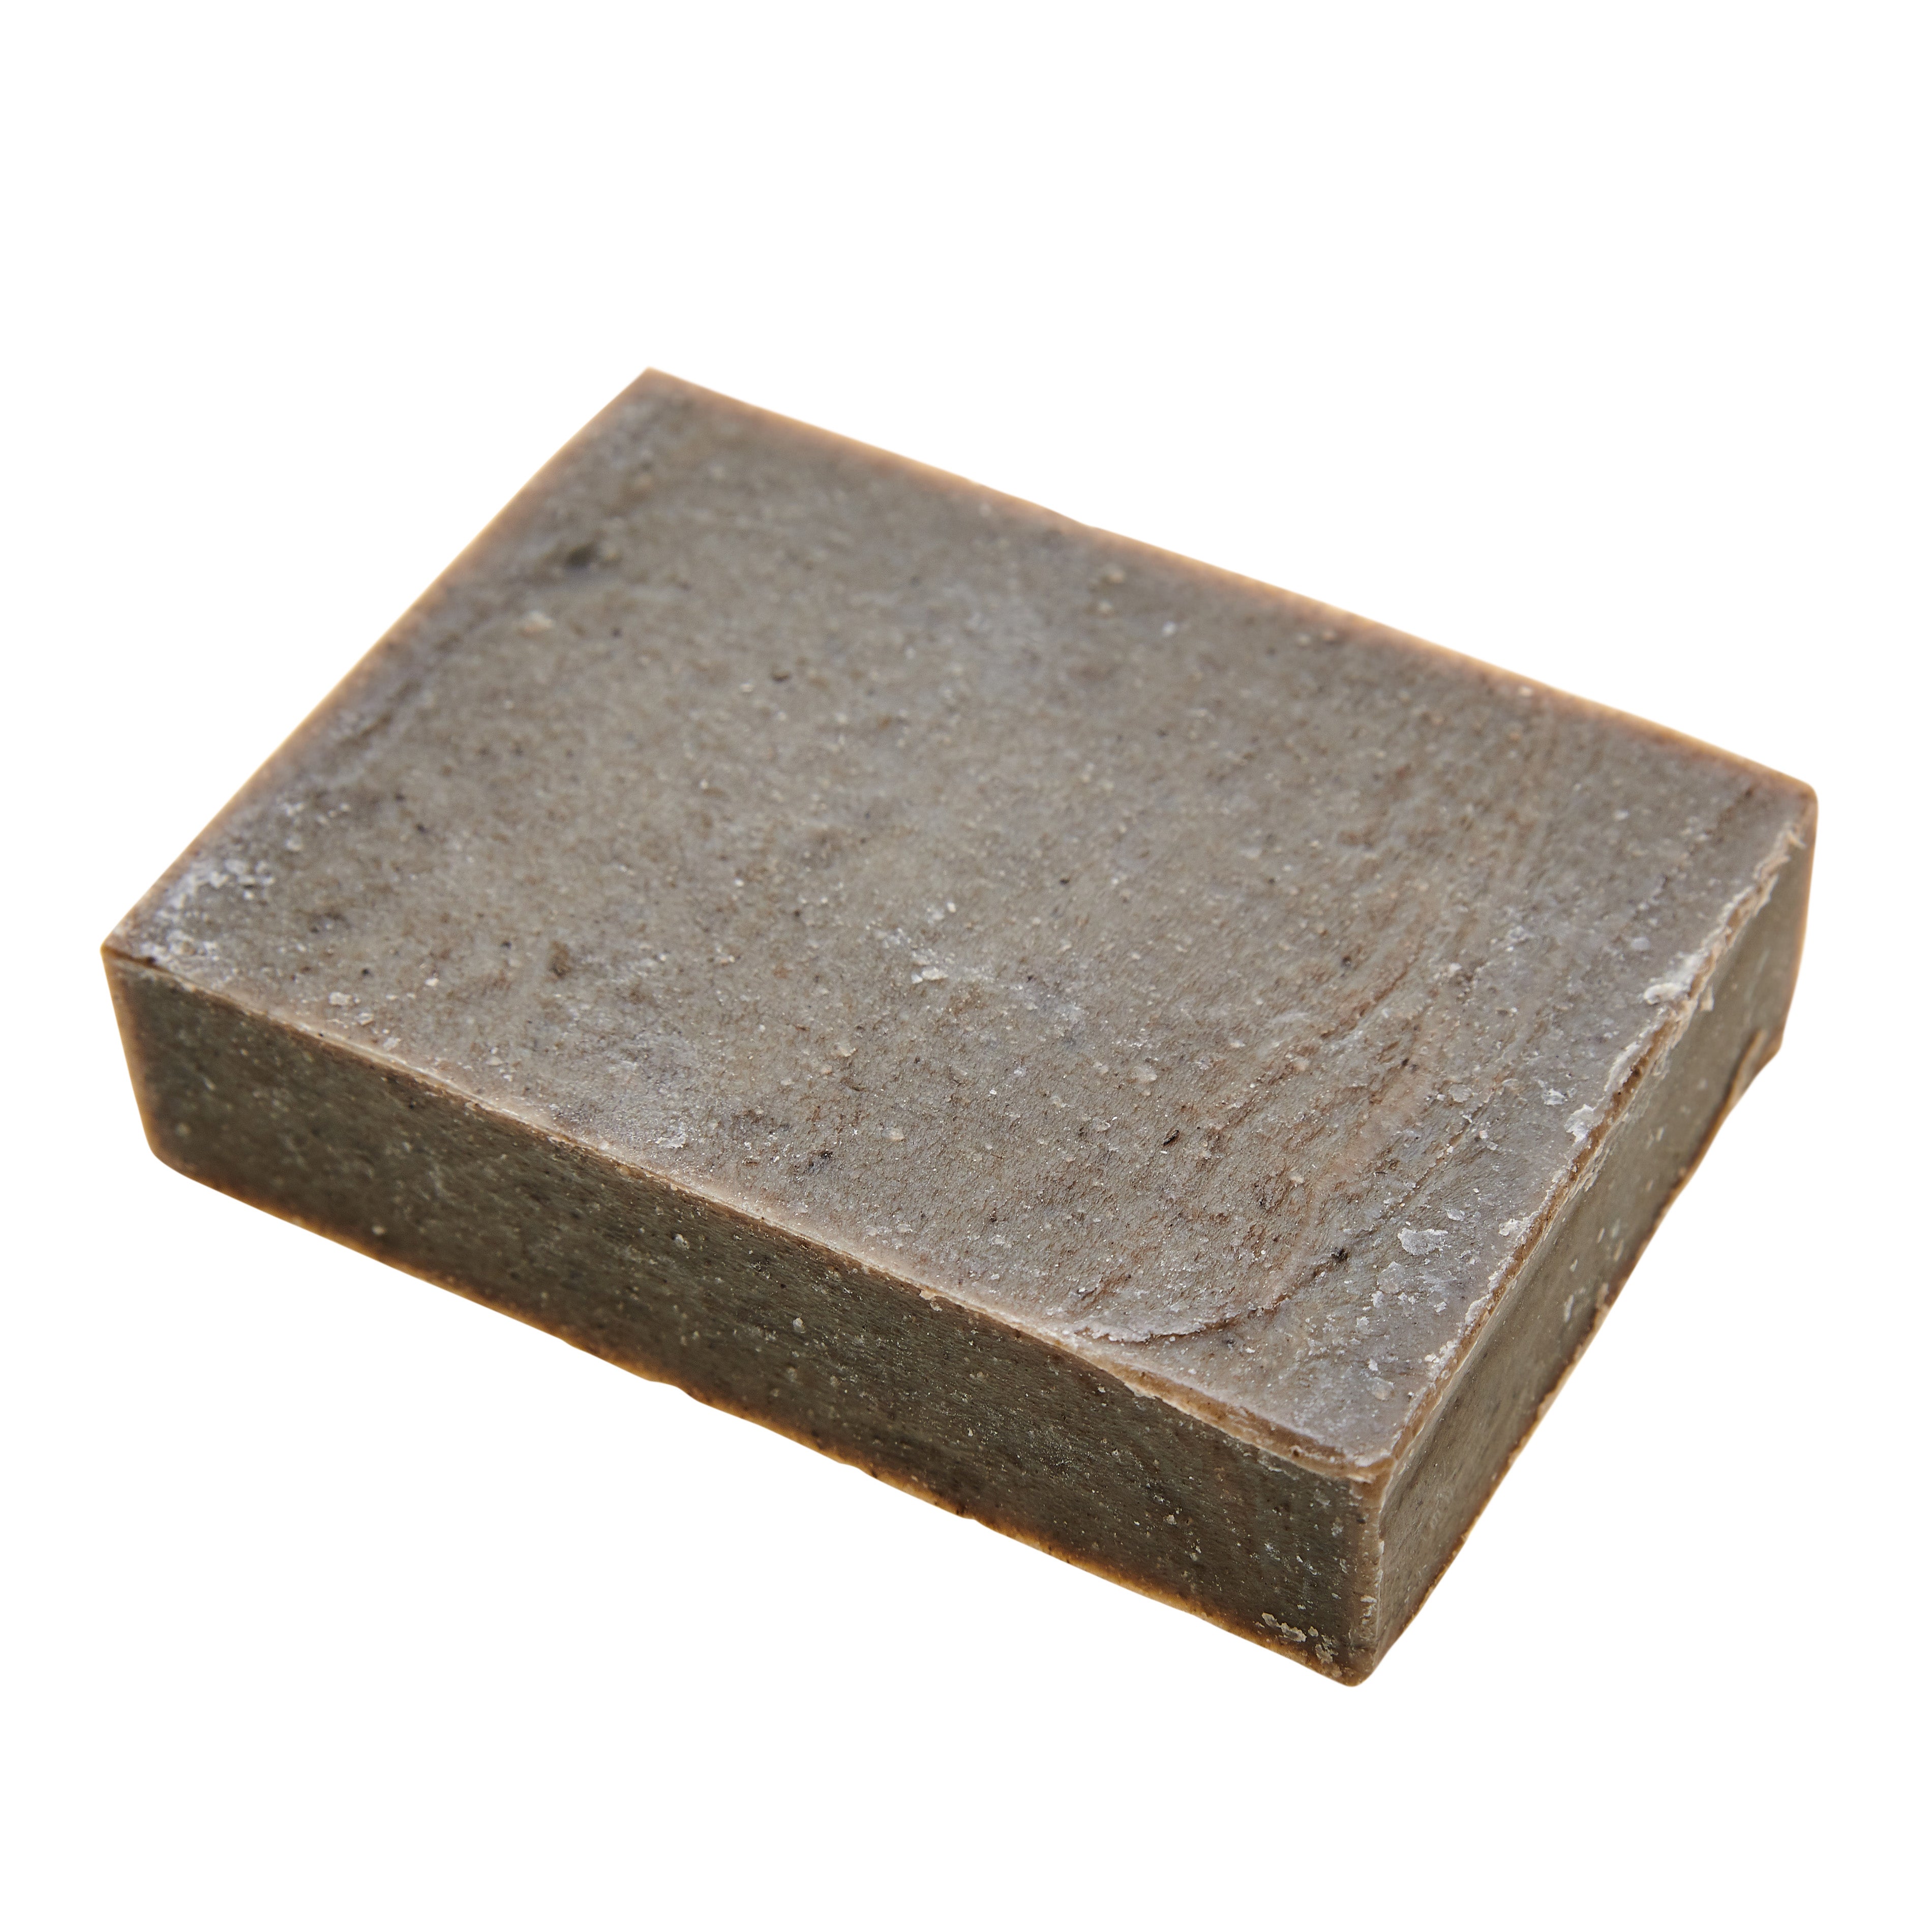 Clay Soap for Acne